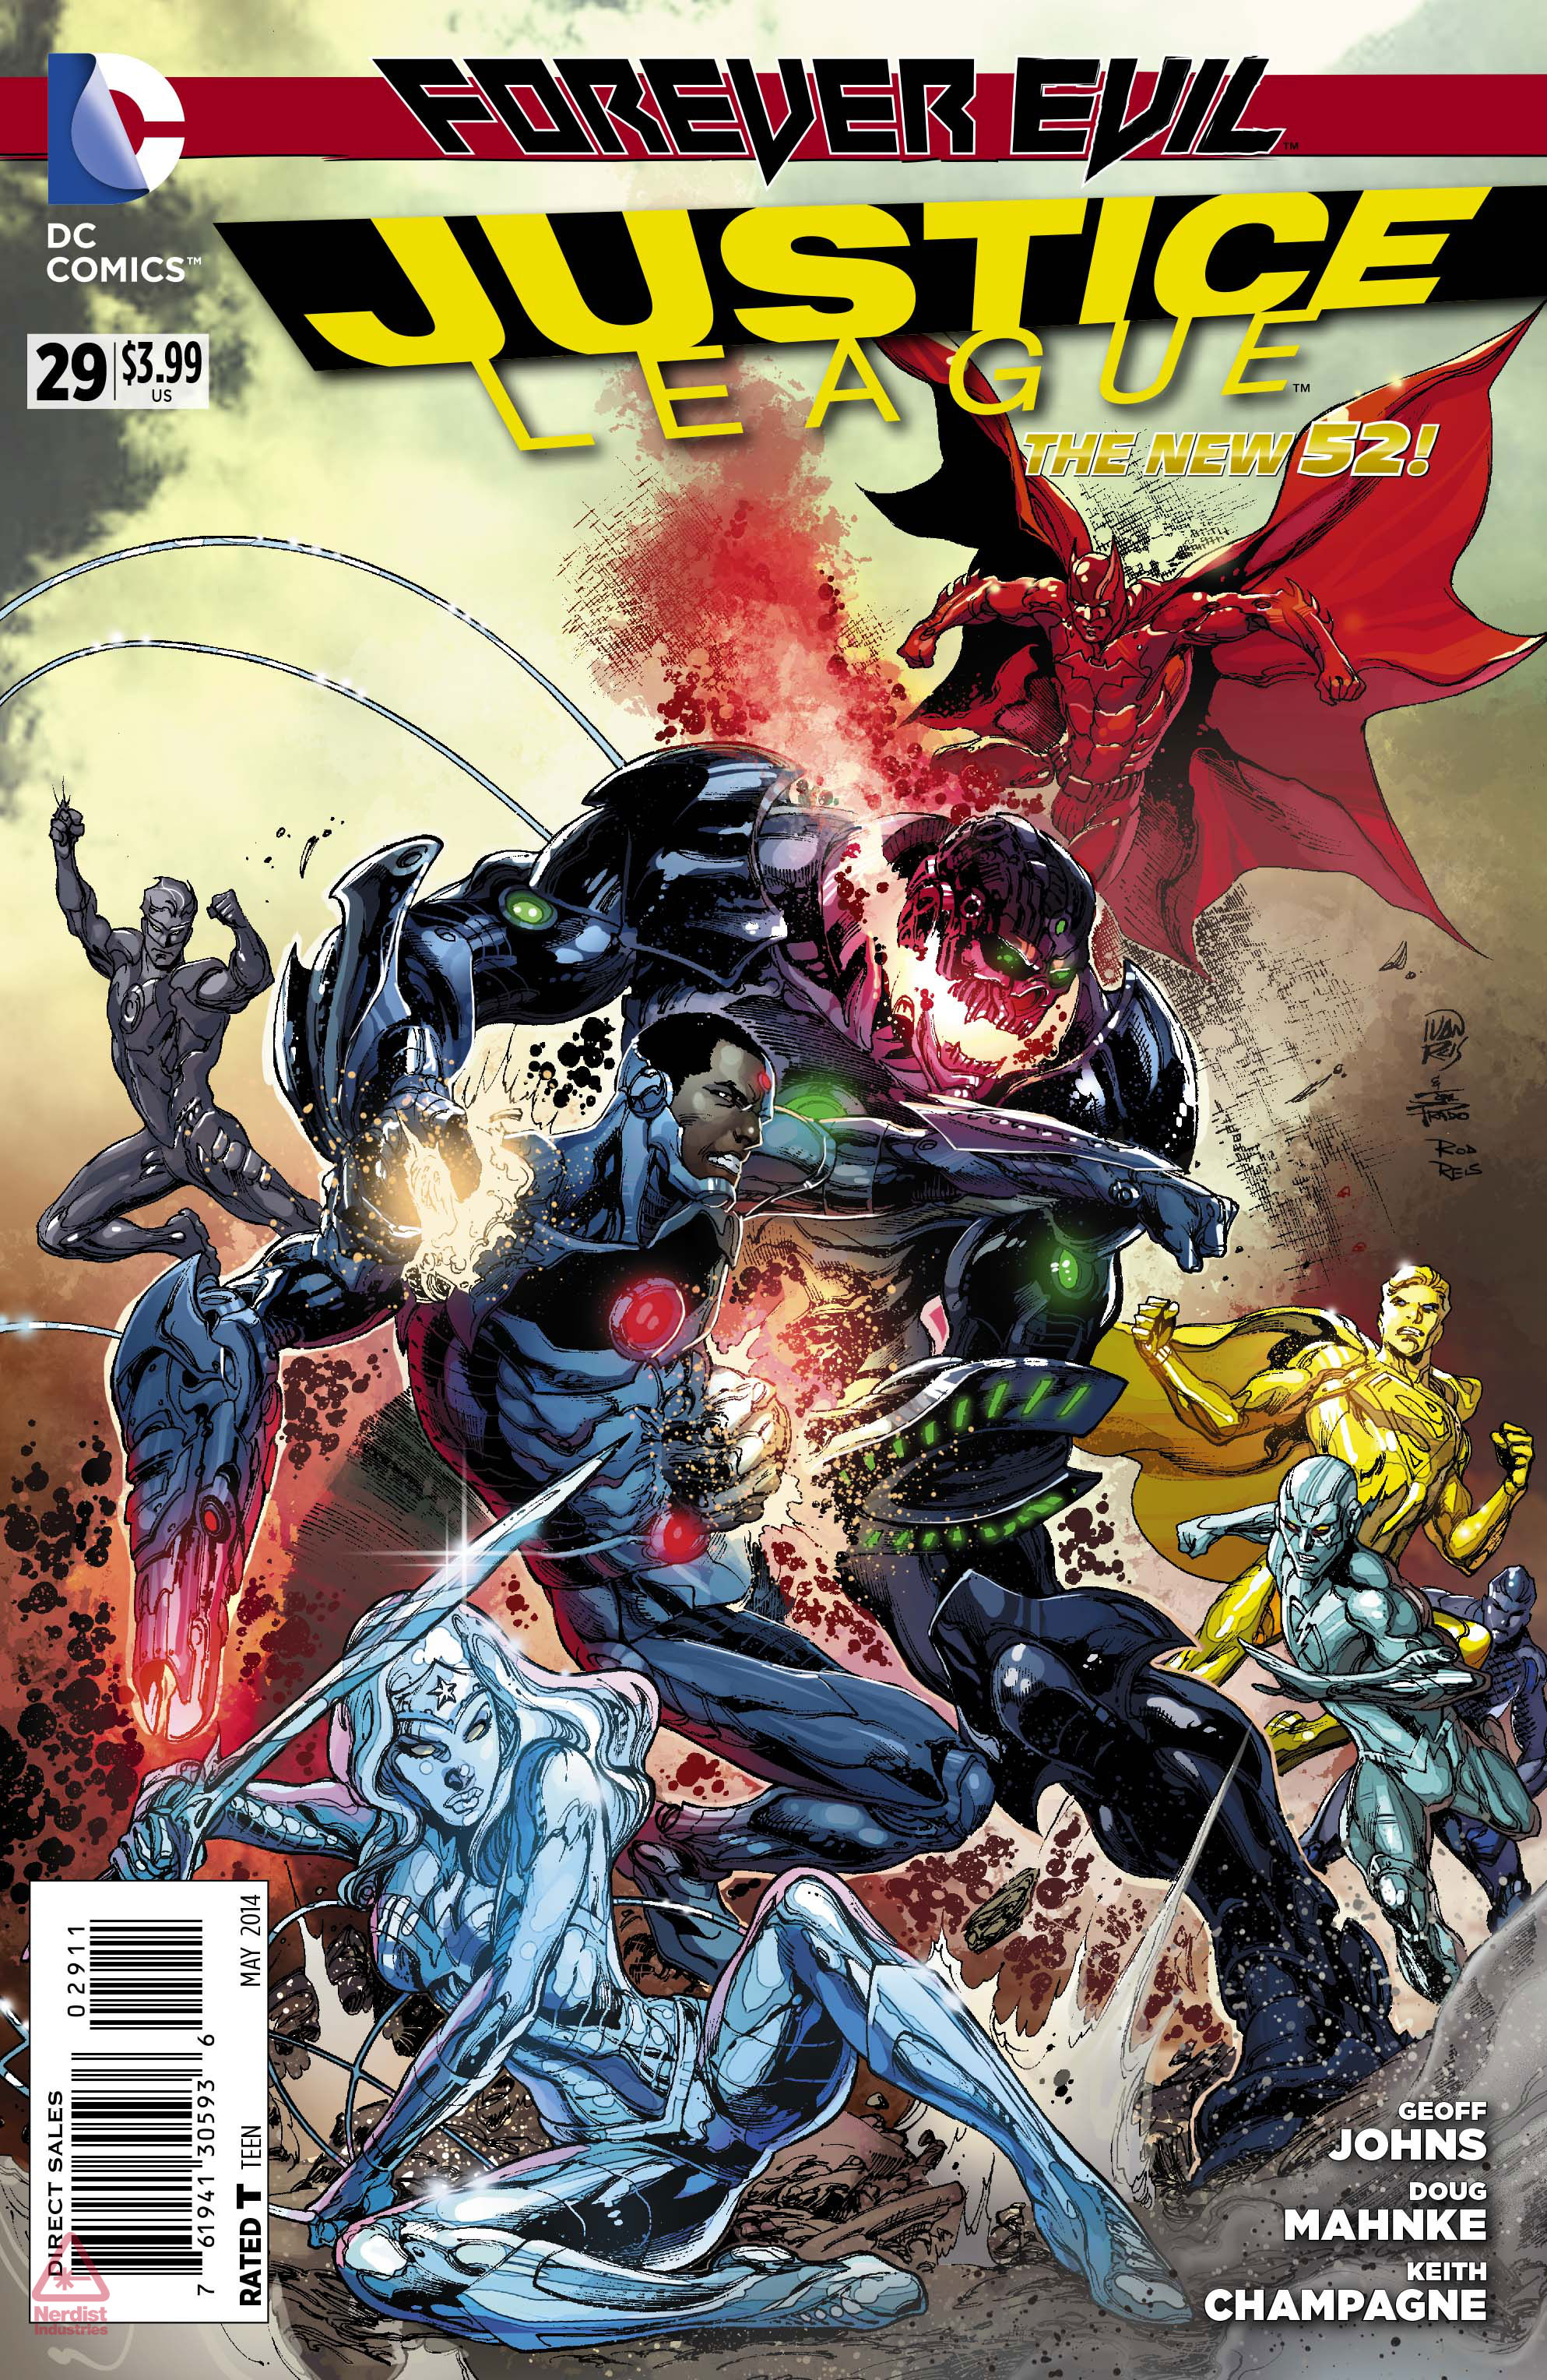 Forever Evil: Rogues Rebellion # 6 DC Comics The New 52! –